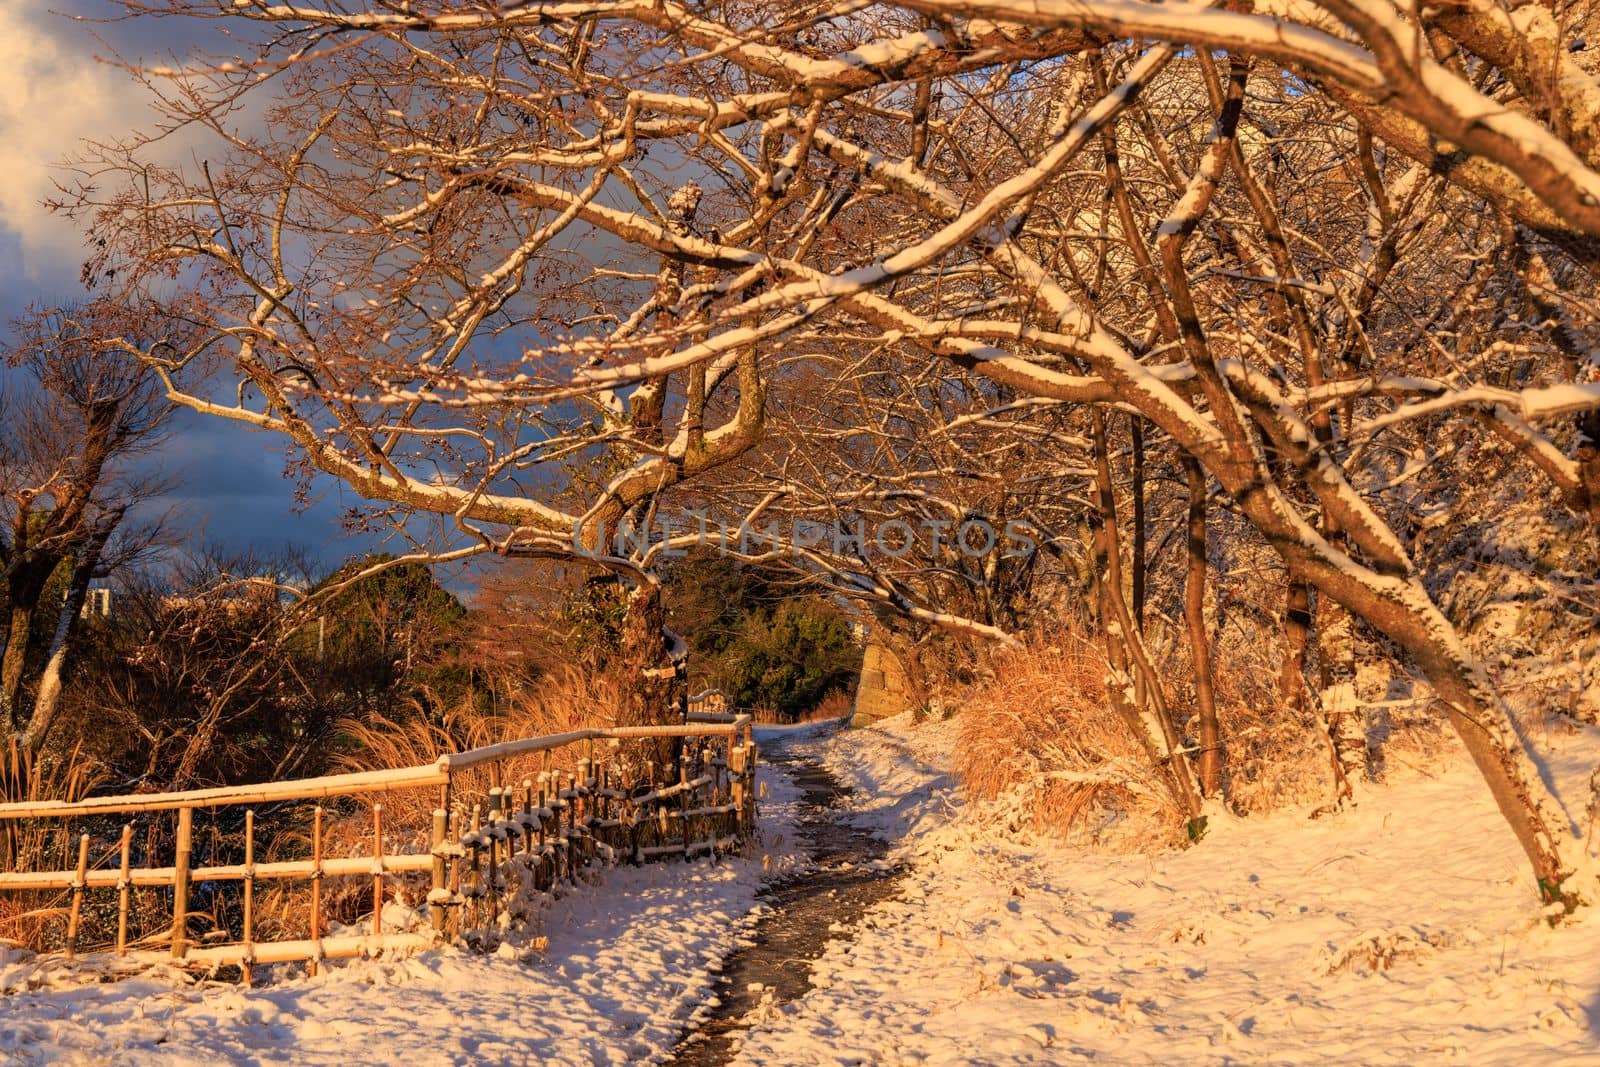 Early morning light on snowy path under bare branches in rustic park by Osaze